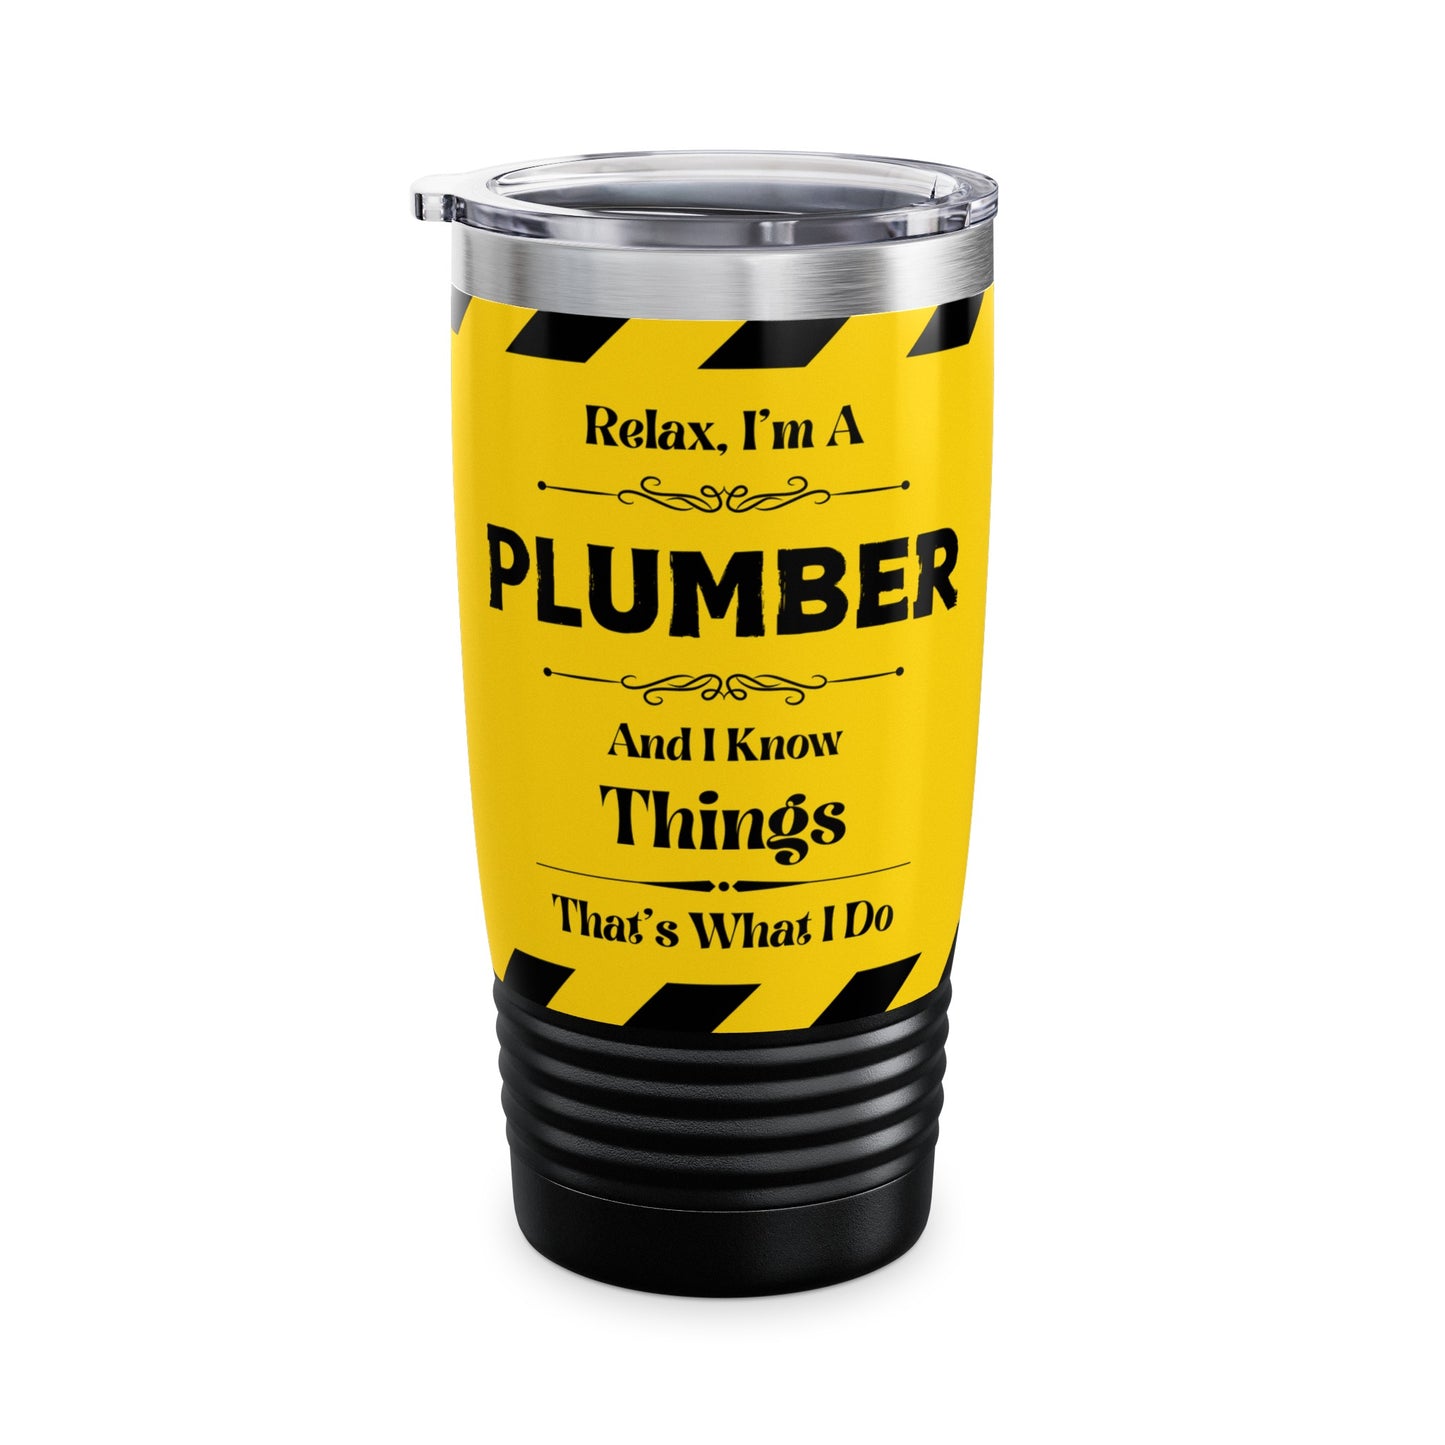 Relax, I'm A PLUMBER And I Know Things - Ringneck Tumbler, 20oz